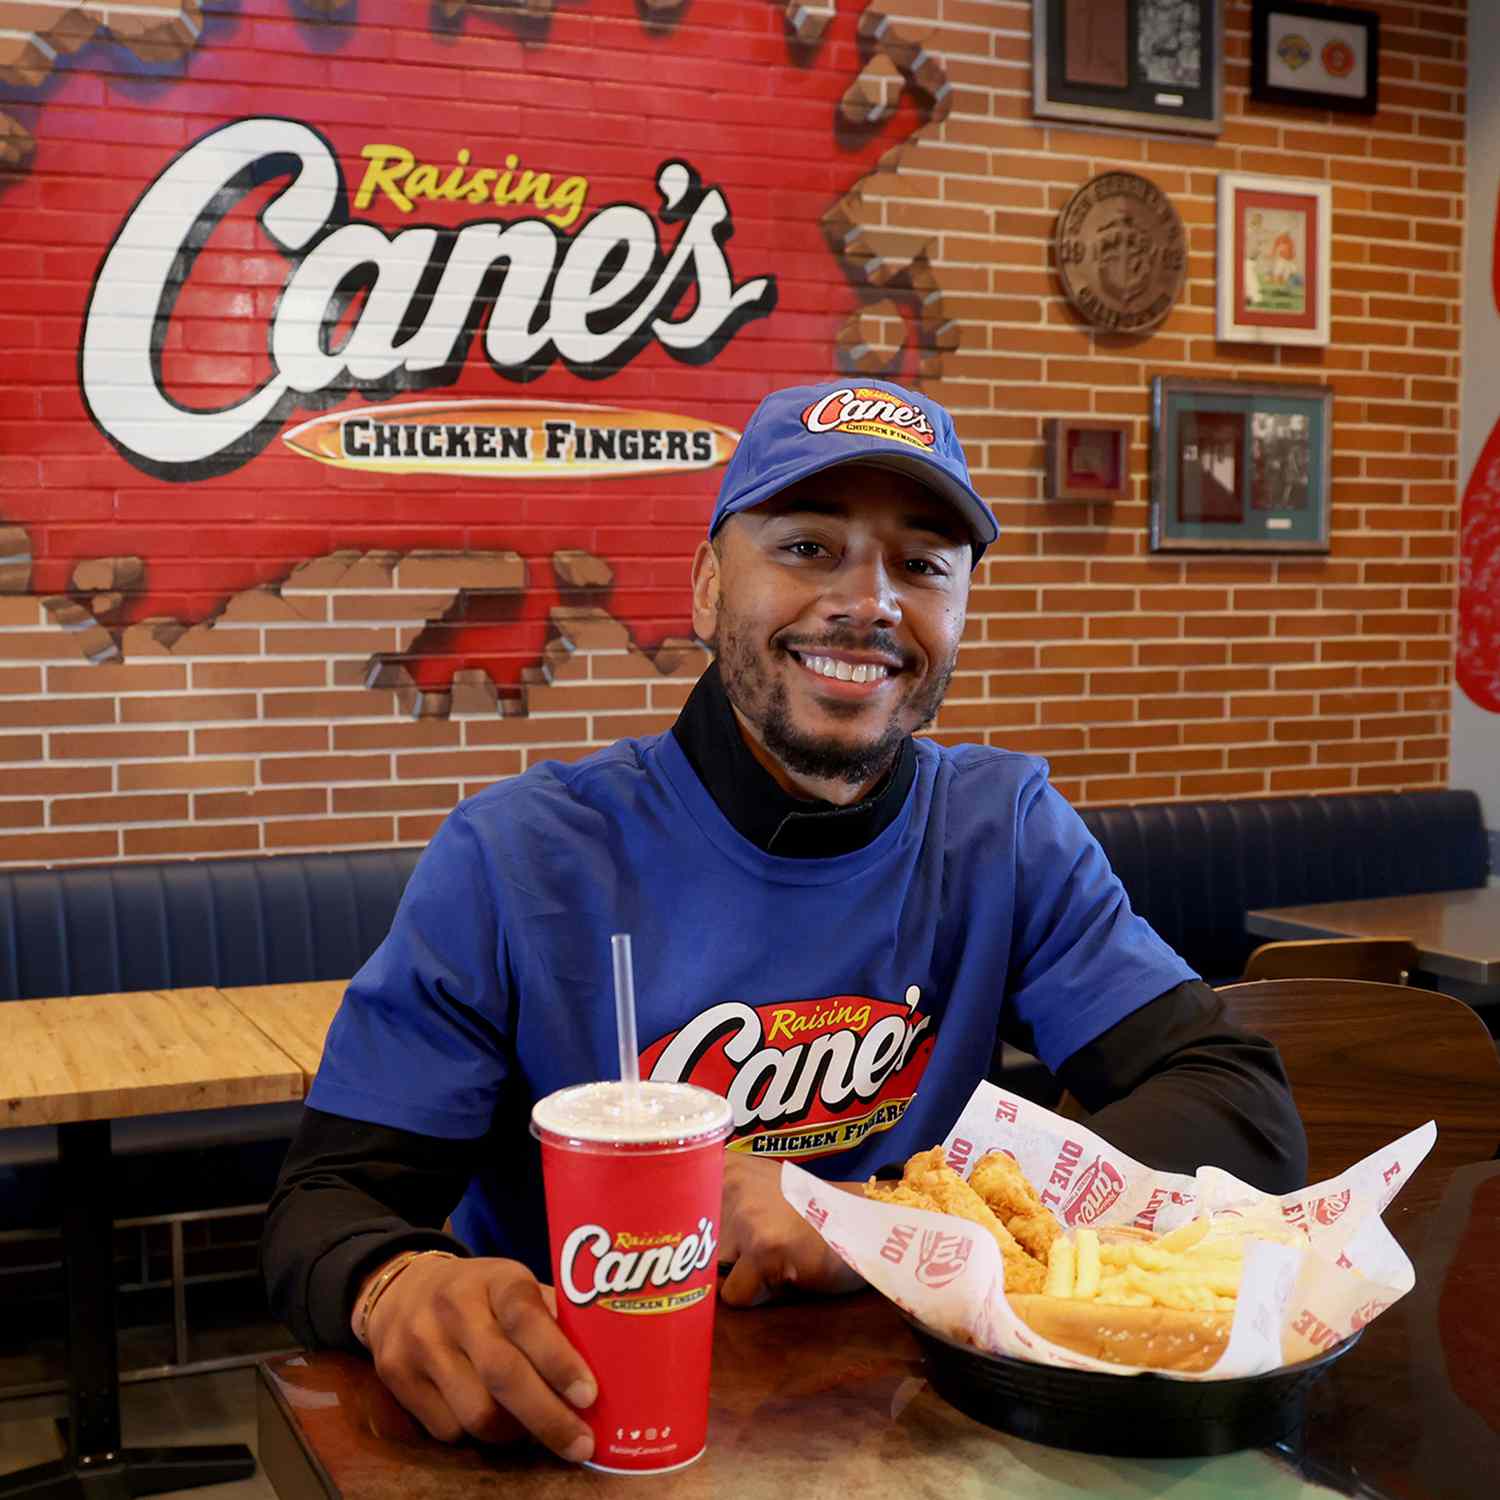 Mookie Betts attends LA Dodgers' Mookie Betts Makes "Shortstop" at Raising Cane's Ahead of Opening Day, receives $100K donation for his 5050 Foundation, at Raising Cane's on March 27, 2024 in Alhambra, California.